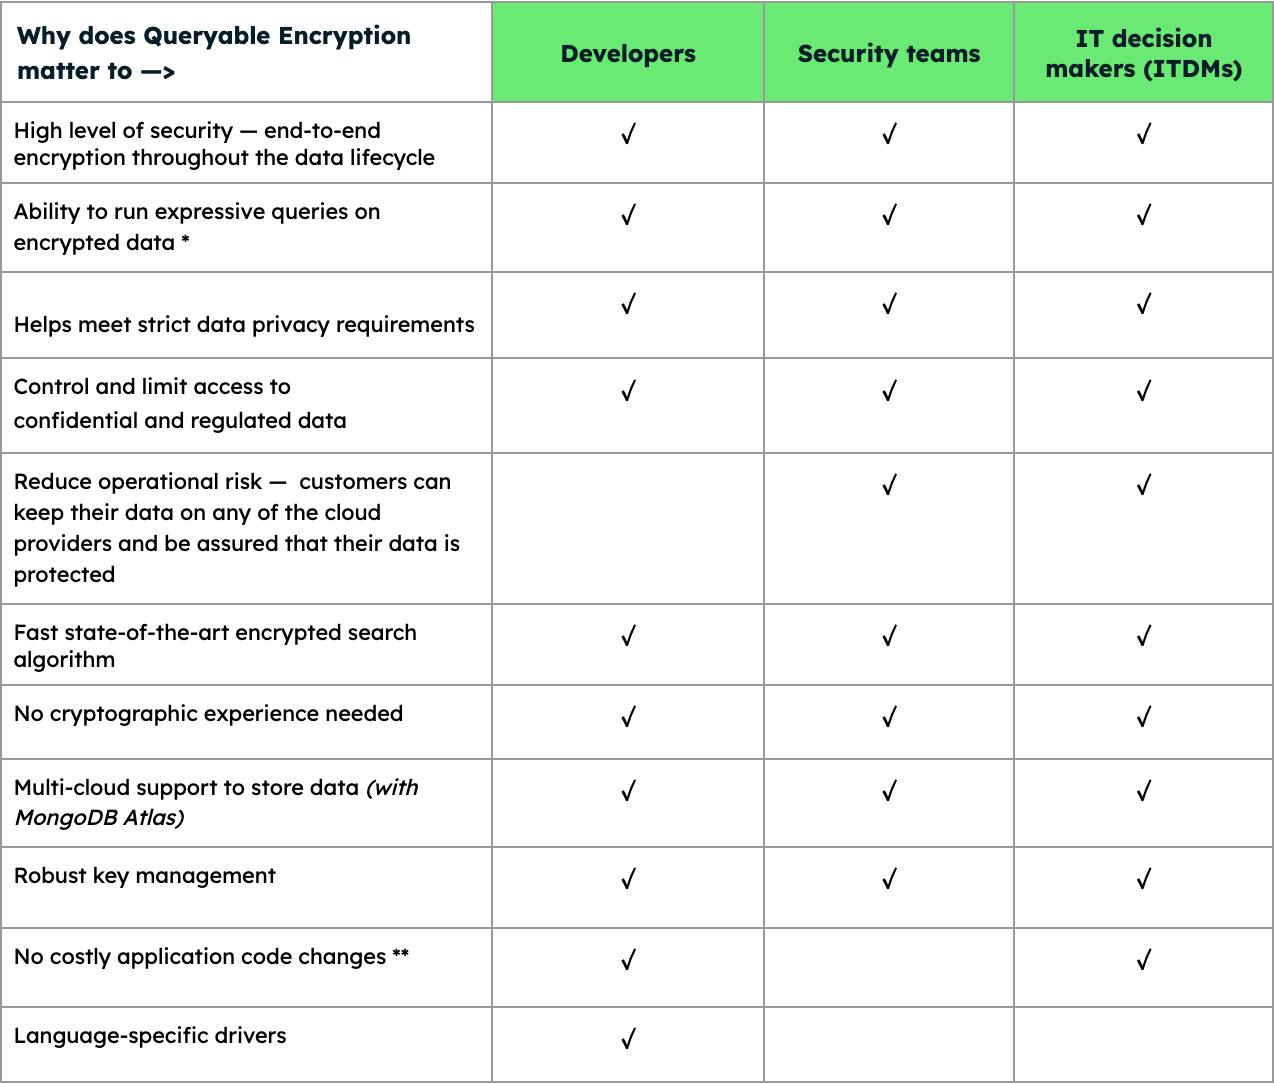 Chart indicating why Queryable Encryption matters to Developers, Security Teams, and ITDMs. High level of security - end-to-end encryption throughout the data lifecycle matters to all three groups. Ability to run expressive queries on encrypted data ** matter to all three groups. The fact that it helps meet strict data privacy requirements matters to all three groups. The ability to control and limit access to confidential and regulated data matters to all three groups. Reduce operational risk - Customers can keep their data on any of the cloud providers and be assured that their data is protected matters to security teams and ITDMs. Fast state-of-the-art encrypted search algorithm matters to all three groups. The fact that no cryptographic experience is needed matters to all three groups. Multi-cloud support to store data (with MongoDB Atlas) matters to all three groups. Robust key management matters to all three groups. The fact that there are no costly application code changes * matters to developers and ITDMs. And finally, language specific drivers matter to developers.